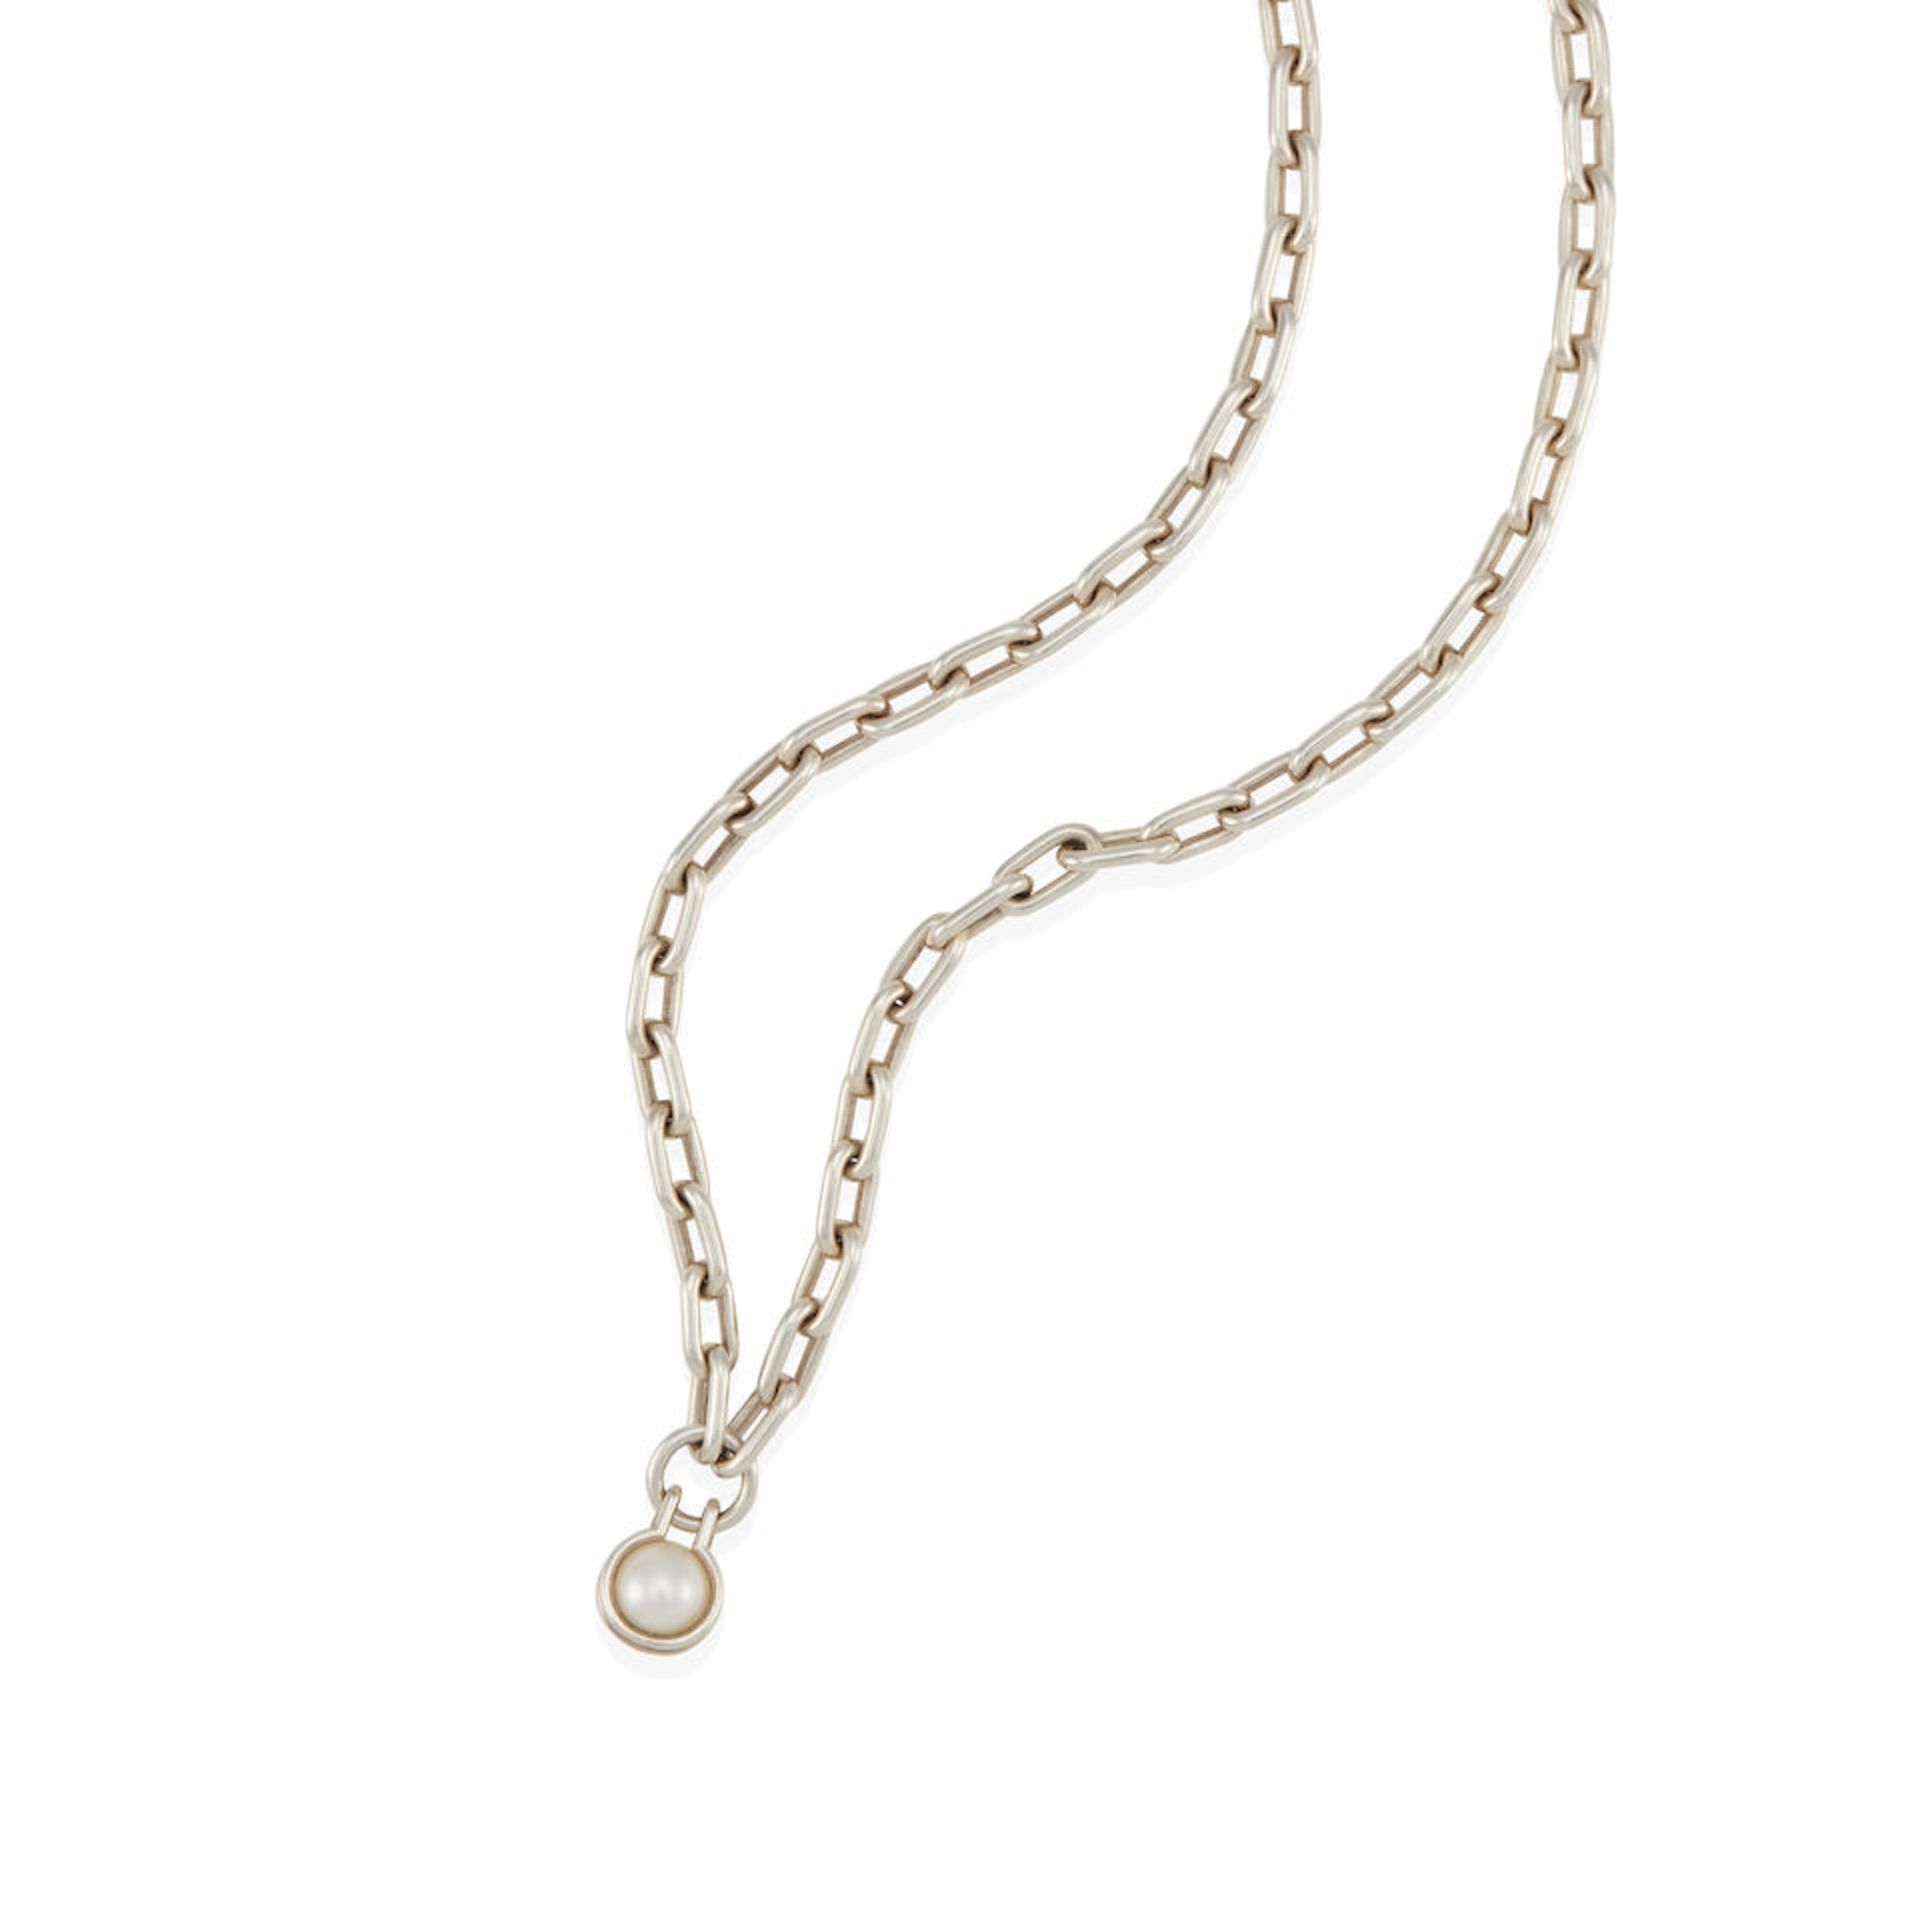 TIFFANY & C0.: A SILVER AND CULTURED PEARL NECKLACE